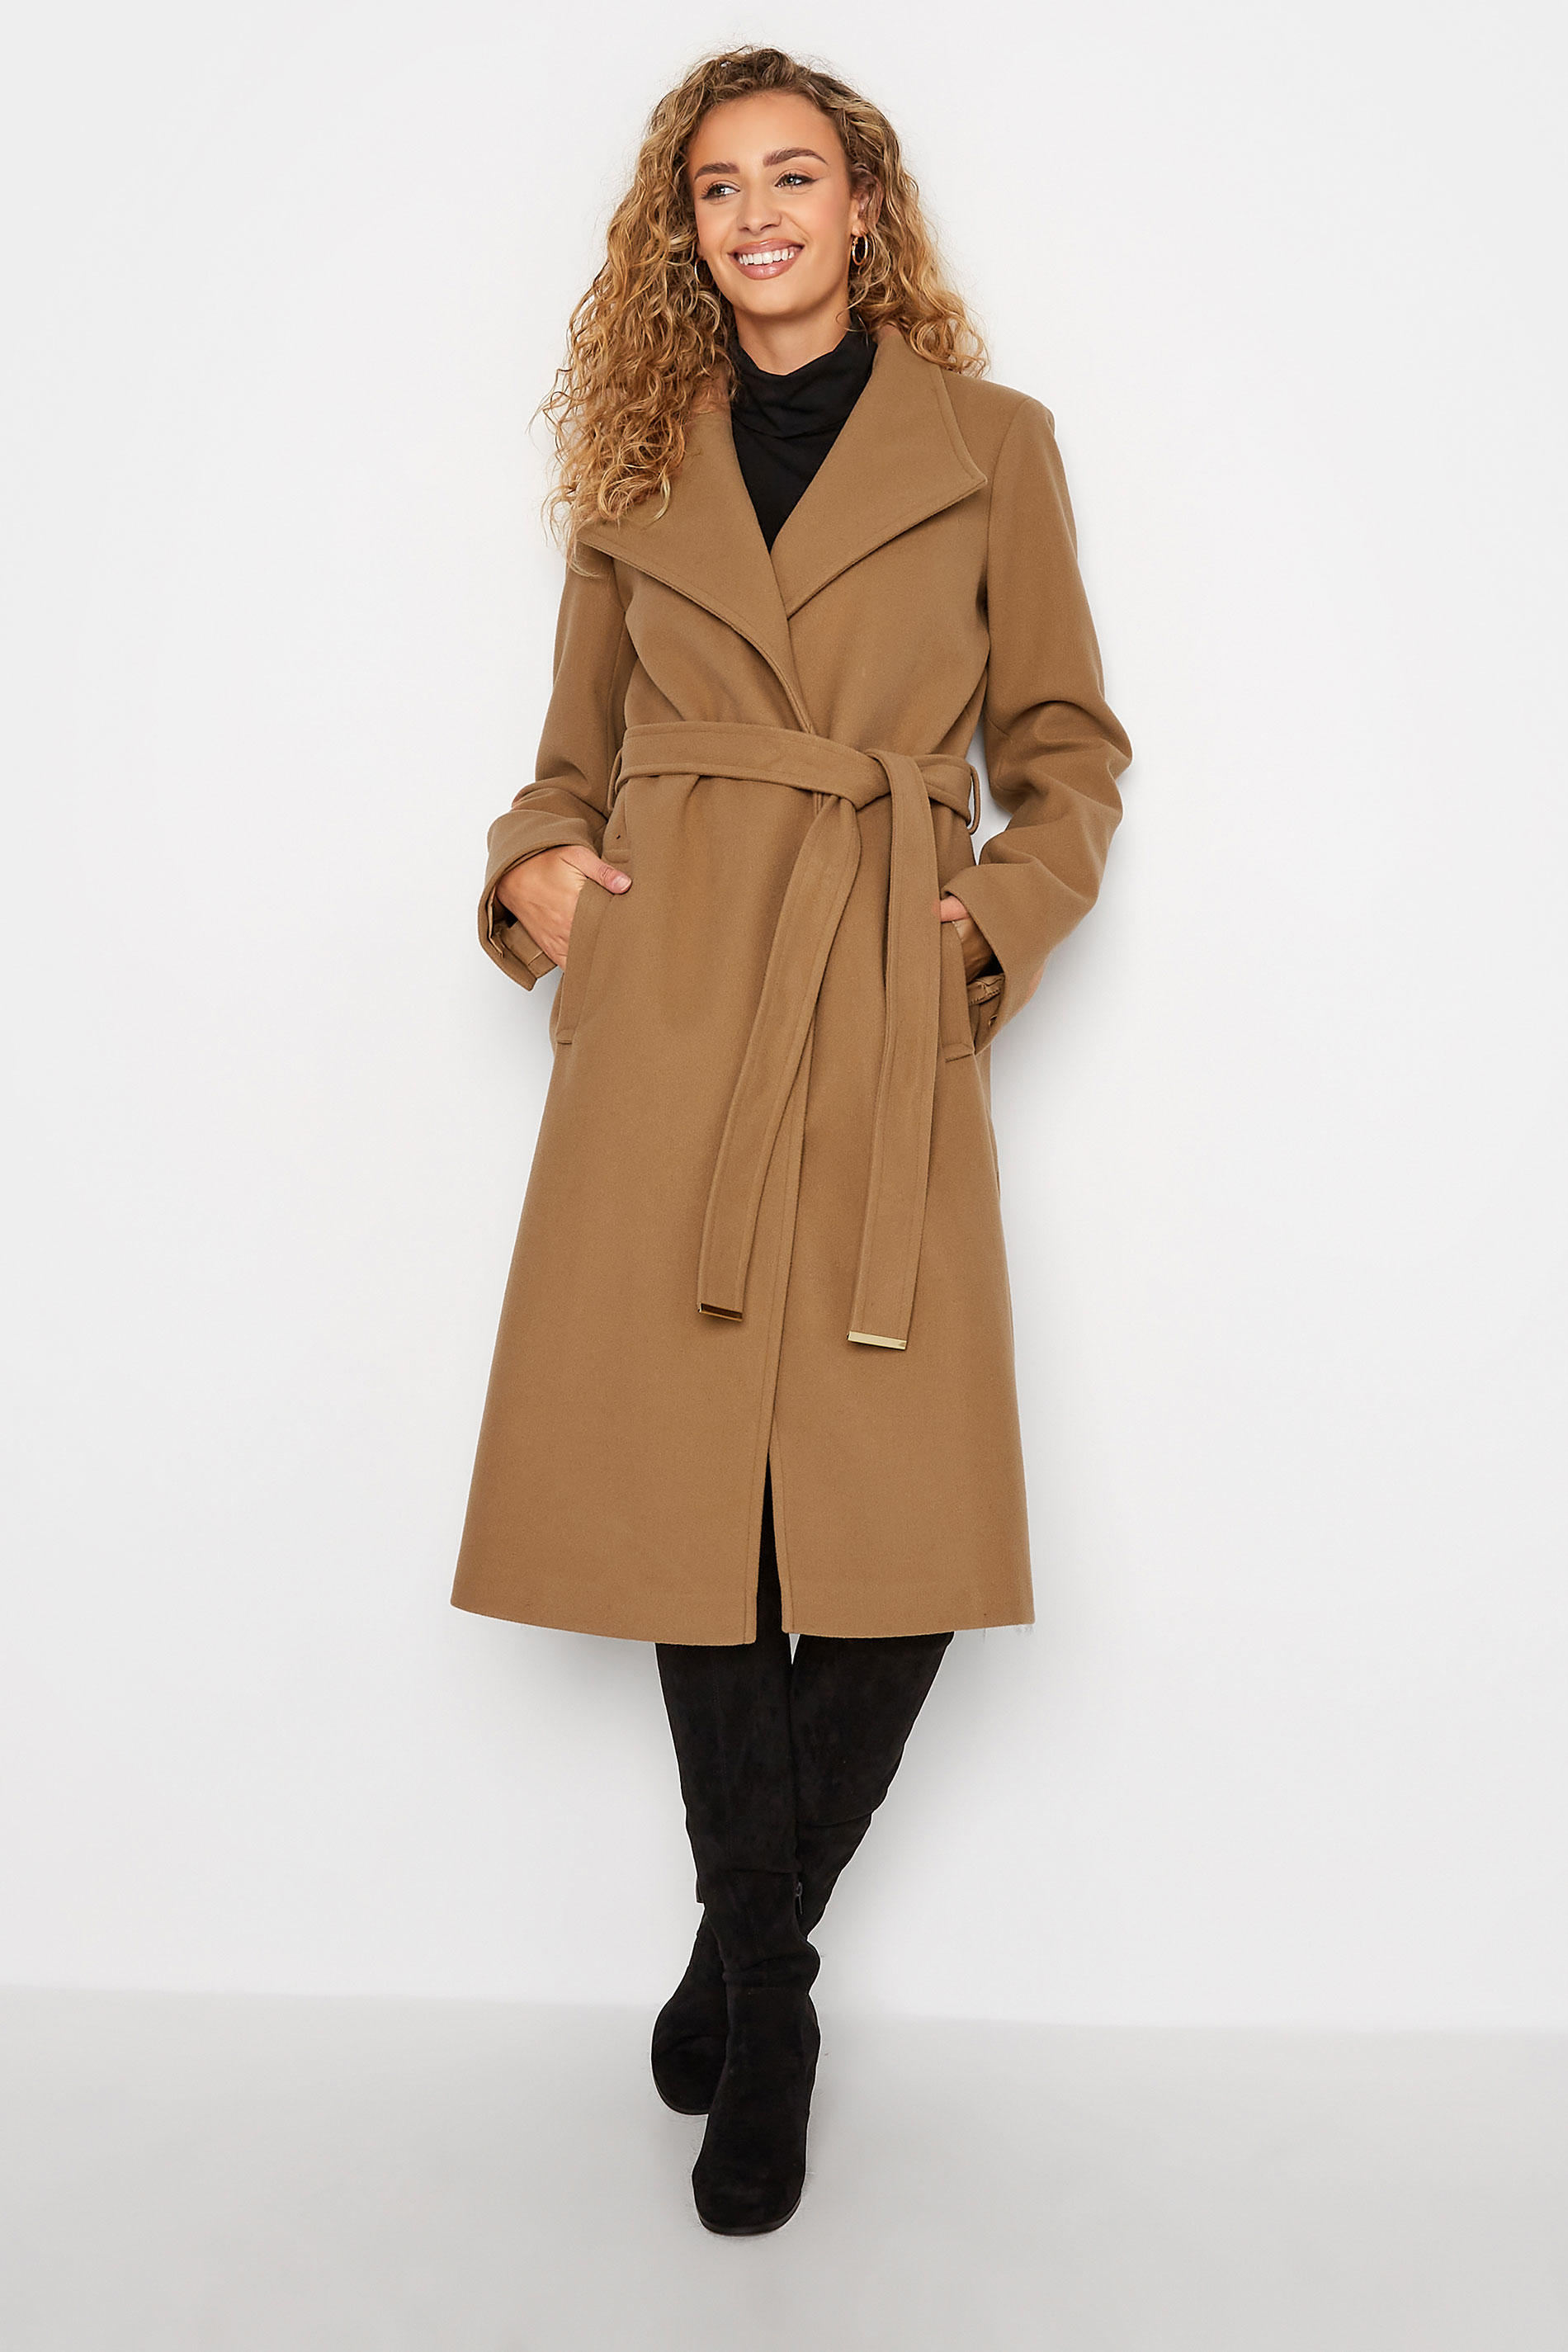 LTS Tall Women's Tan Brown Belted Coat | Long Tall Sally 1